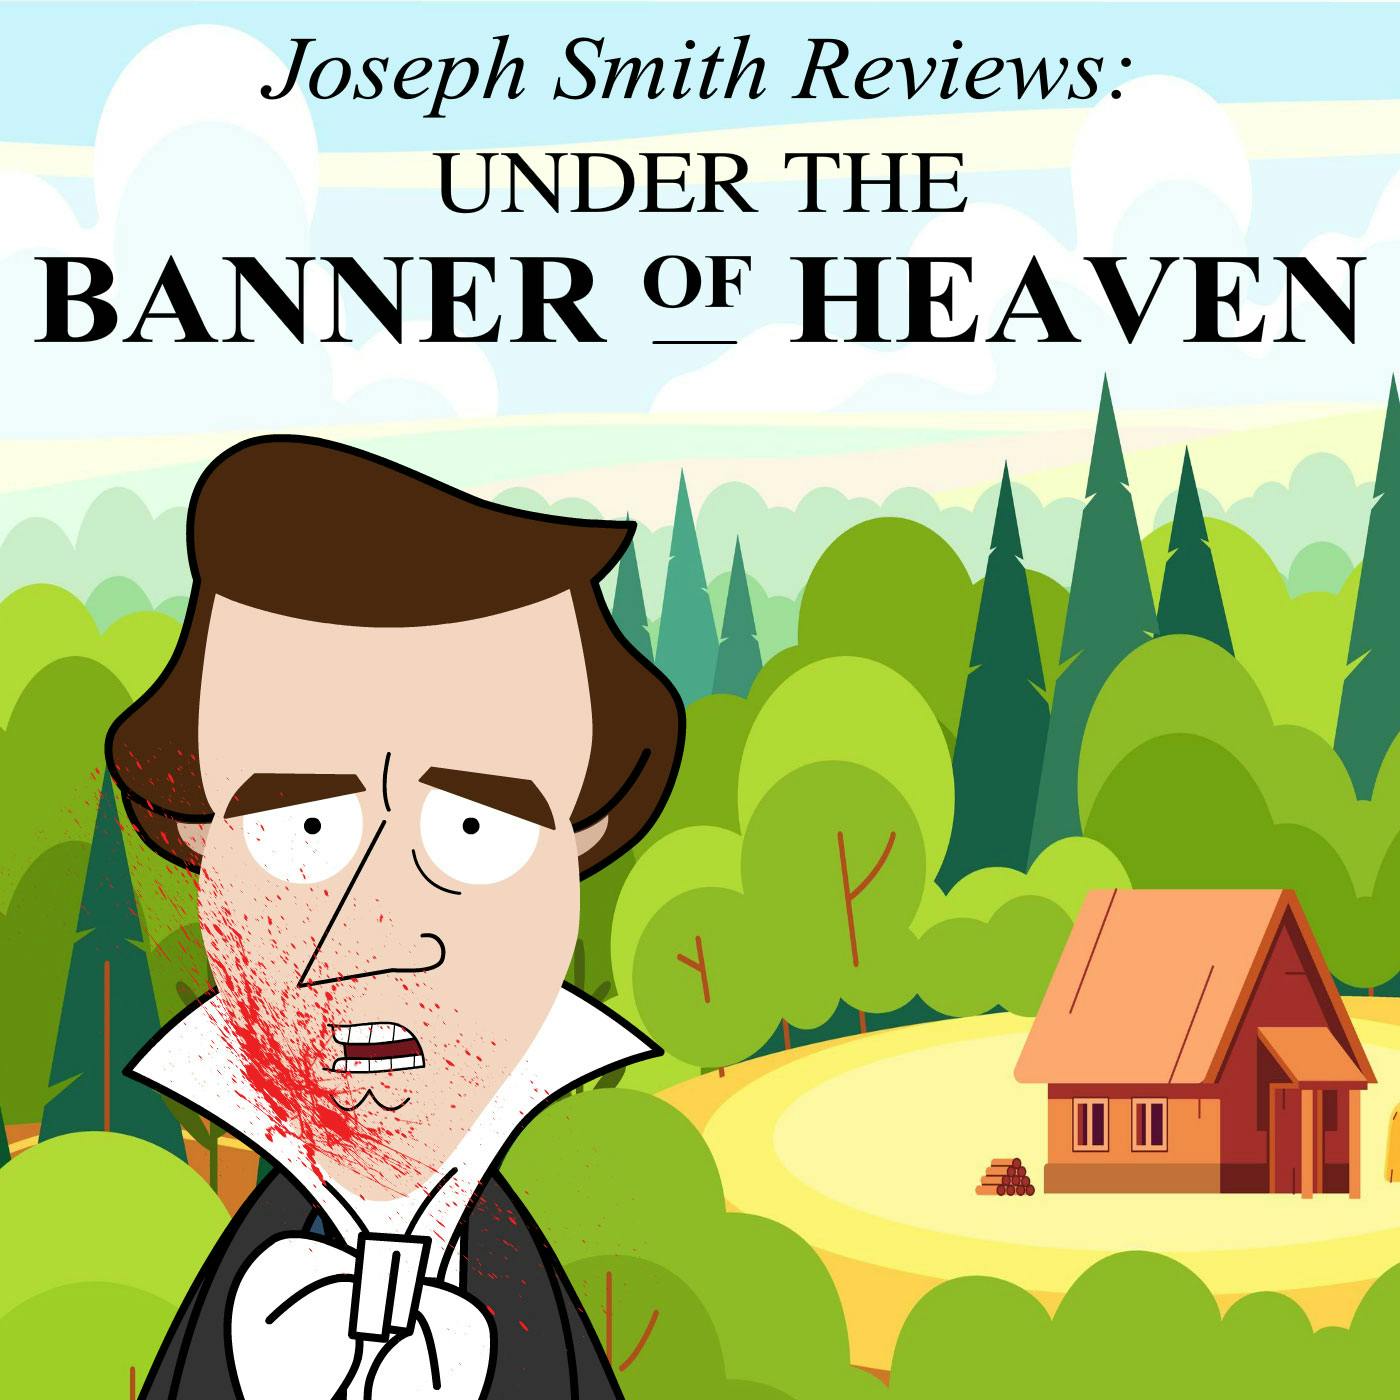 Joseph Smith Reviews ‘Under The Banner Of Heaven’